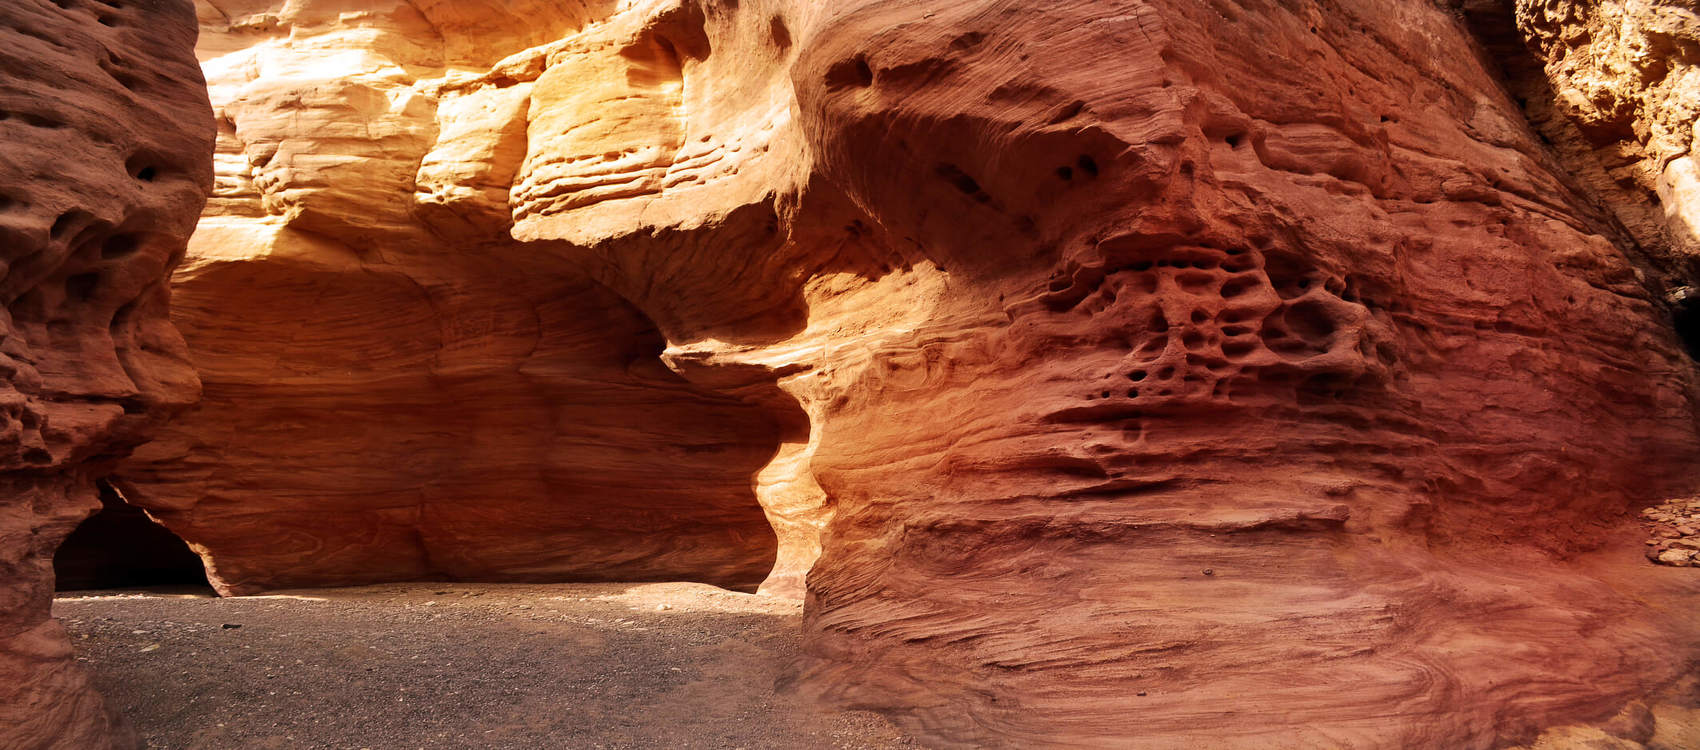 Red Canyon, Desert Agriculture, and Kibbutz Life Tour from Eilat Only $65